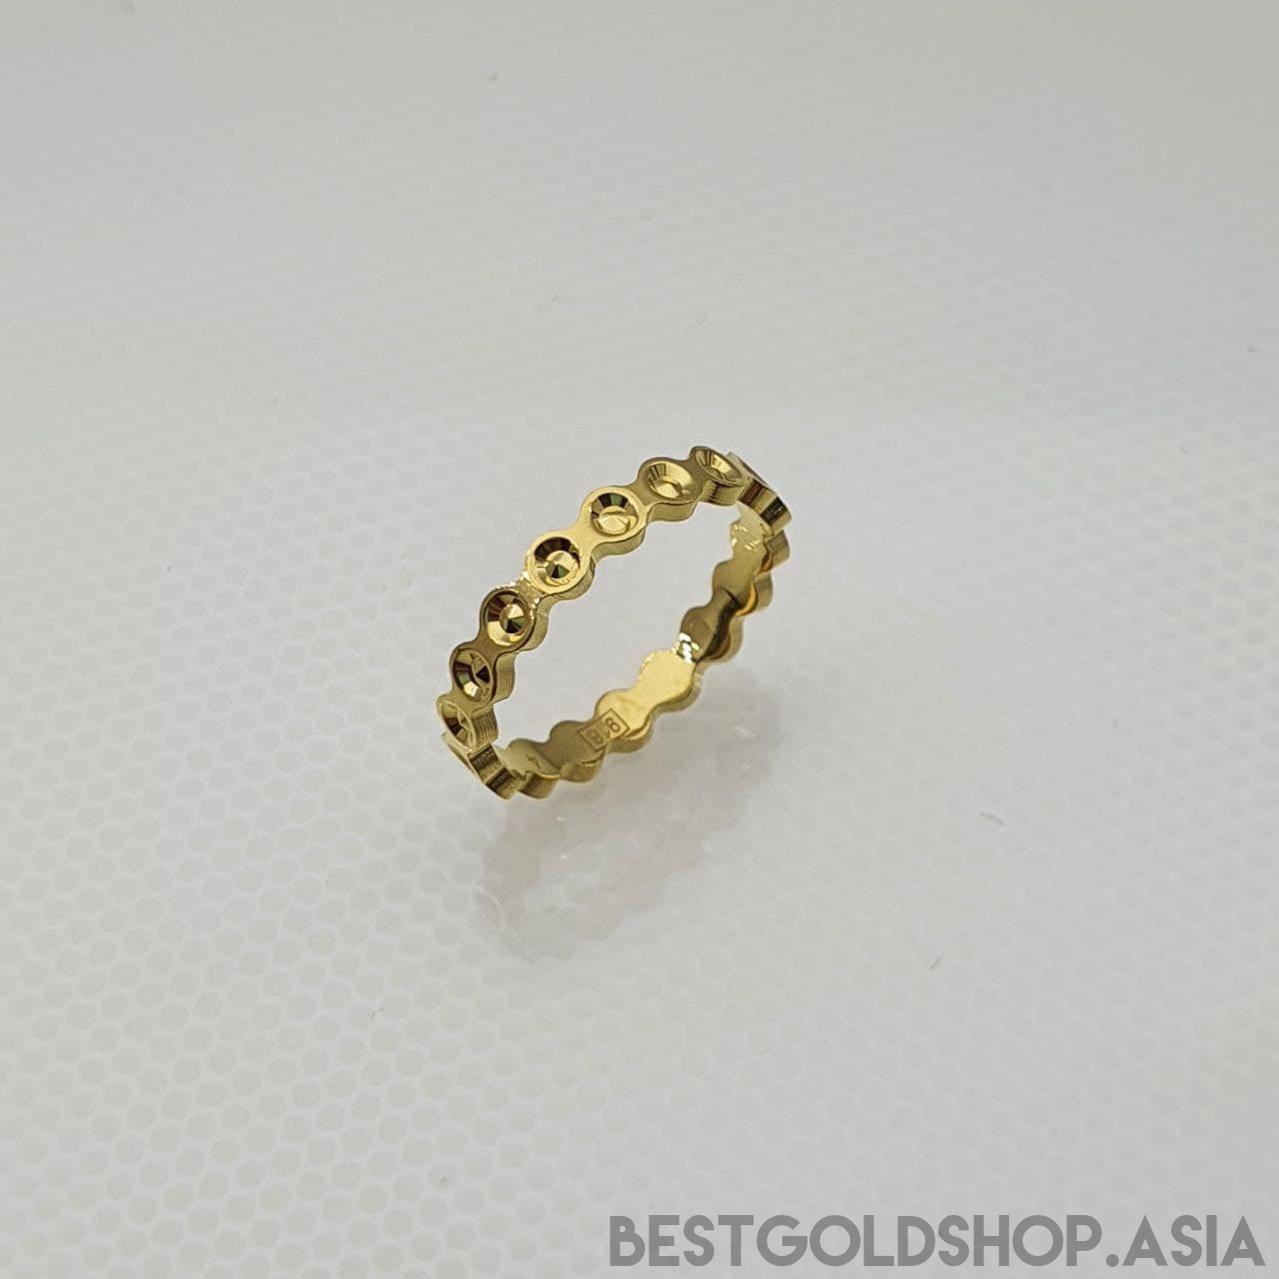 22k / 916 Gold Pinky Ring Smooth finish V1-916 gold-Best Gold Shop